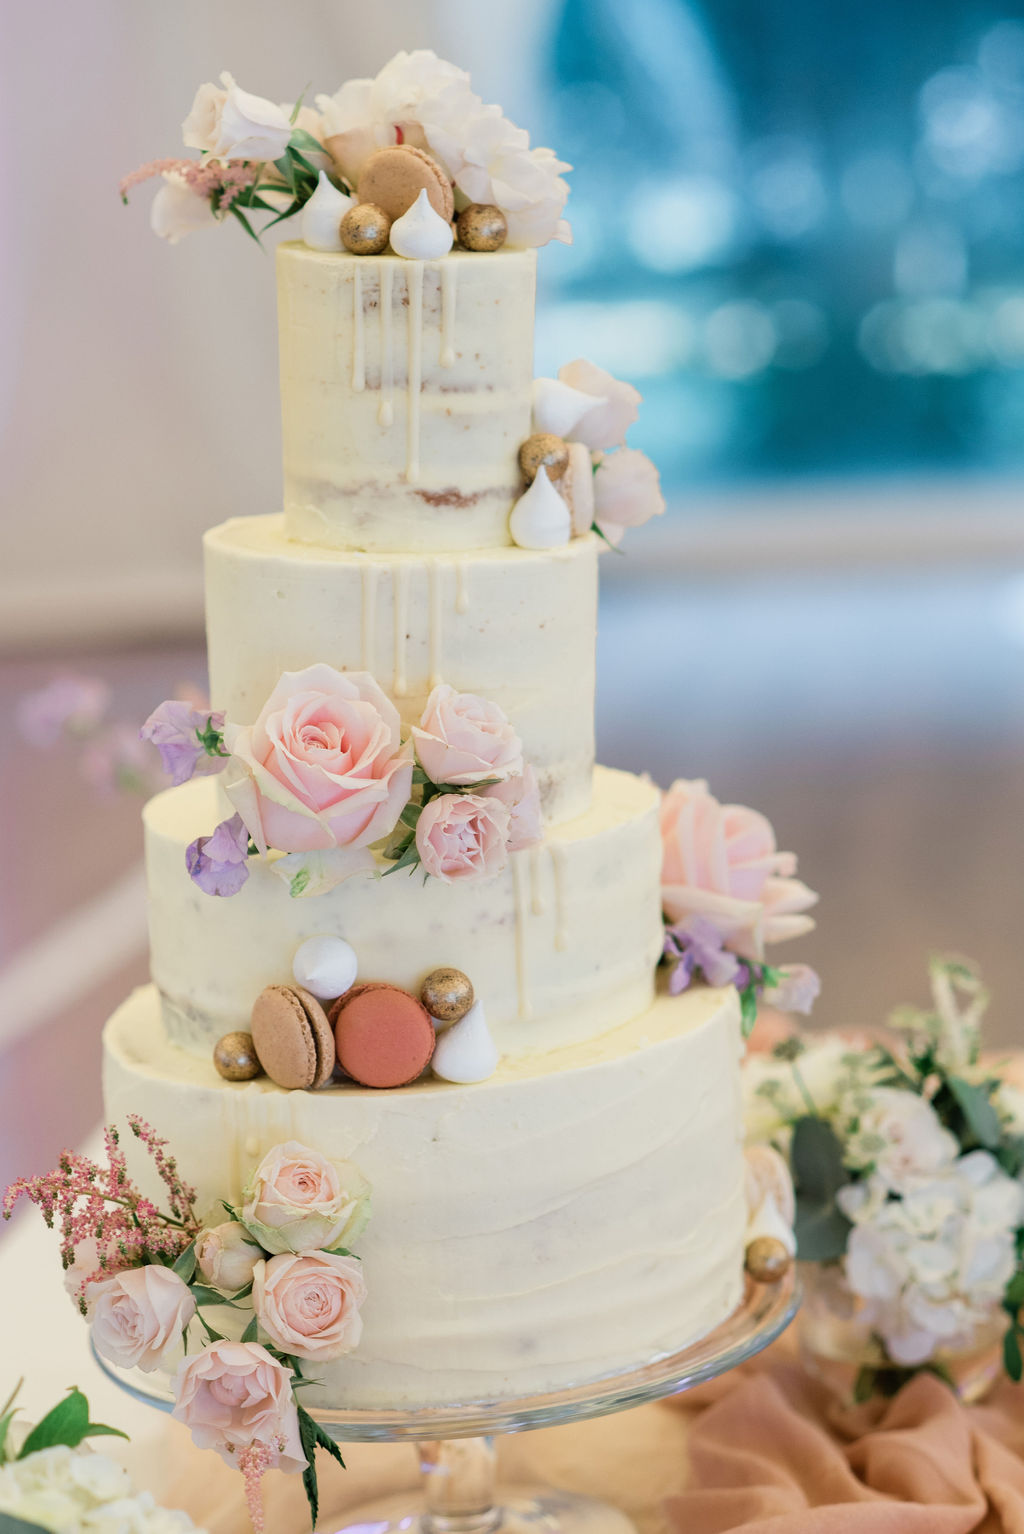 4 tier buttercream cake for a summer wedding at Chiswick House, London | Sugar Plum Bakes